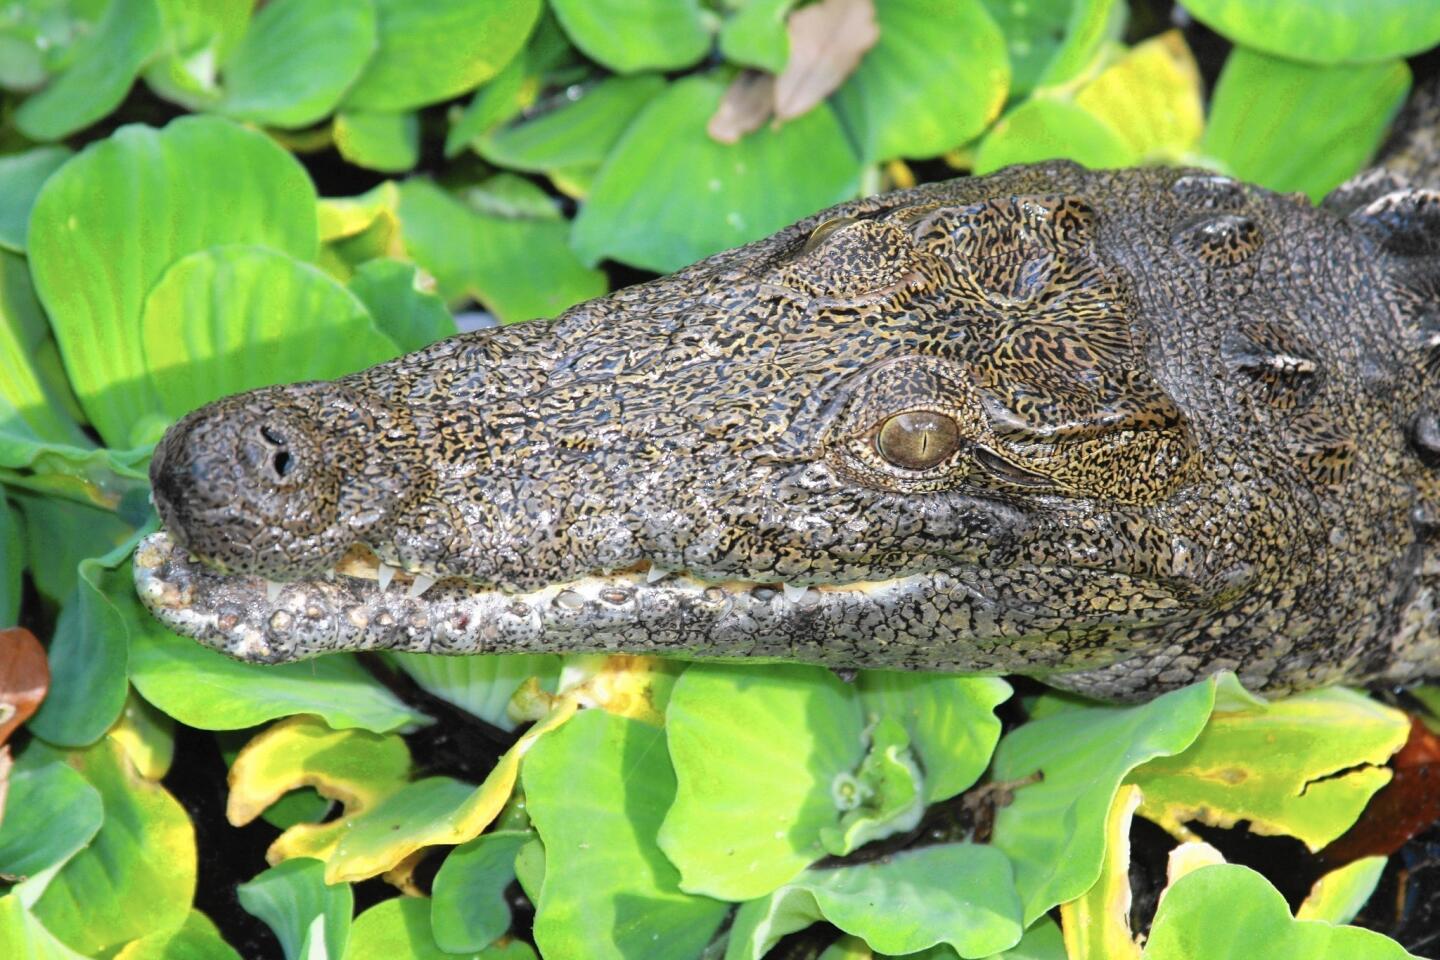 This 2012 photo provided by Joe Wasilewski, shows a Nile crocodile that he found in Homestead, Fla. University of Florida researchers recently published a paper showing that captured reptiles in 2009, 2001 and 2014 are Nile crocs. Read more.